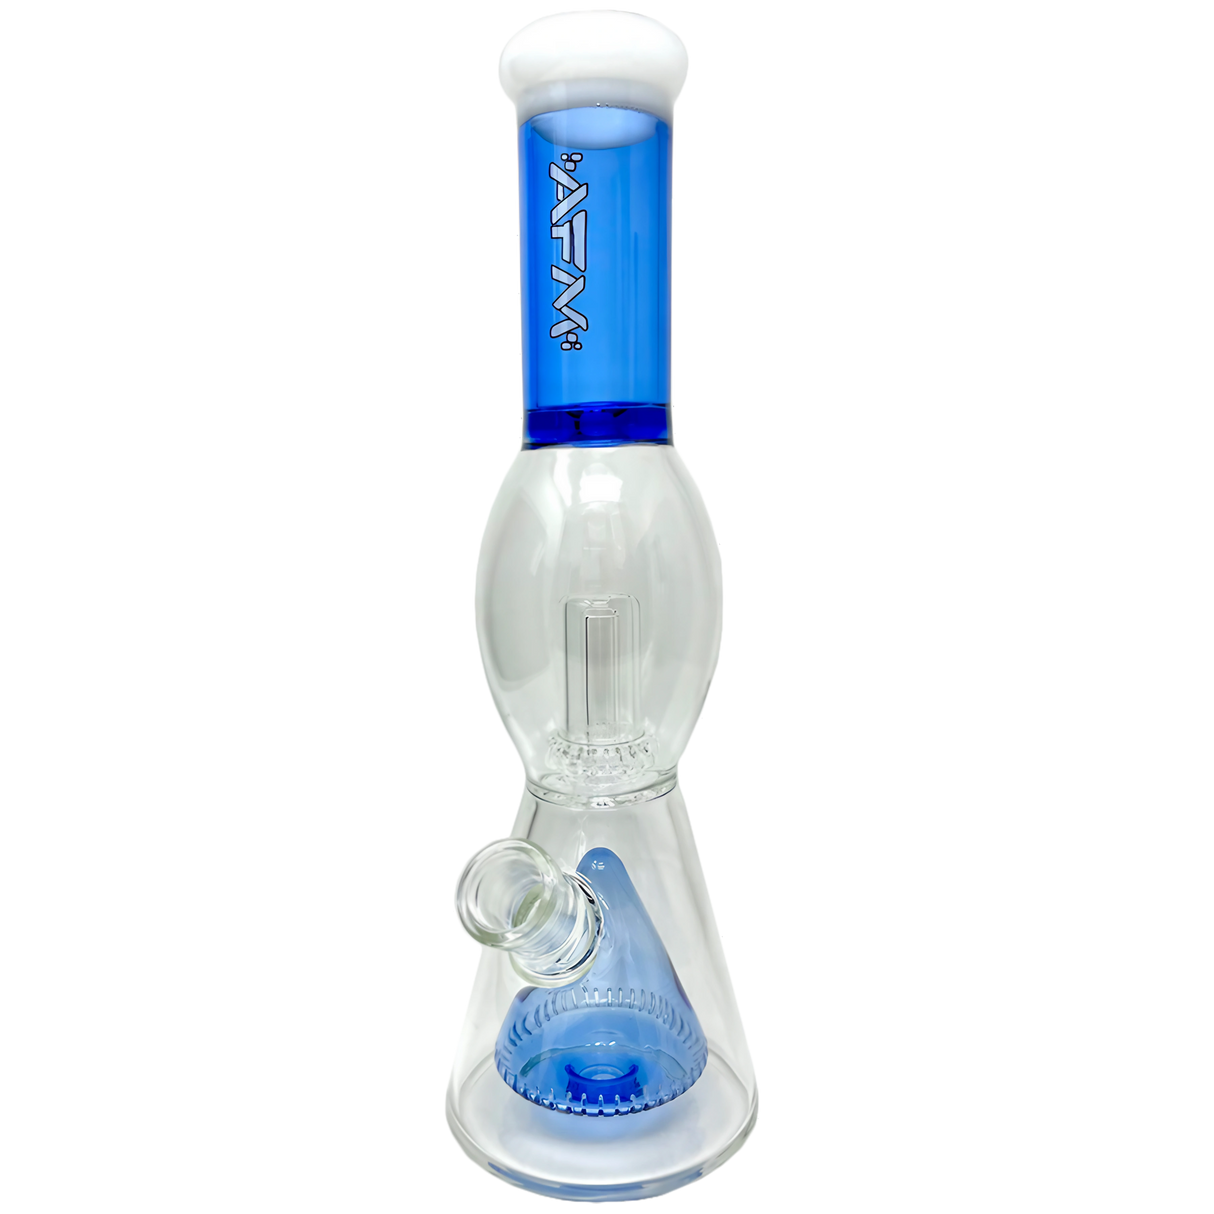 AFM Pyramid UFO Beaker Bong in Blue, 13" with Showerhead Percolator, Front View on White Background